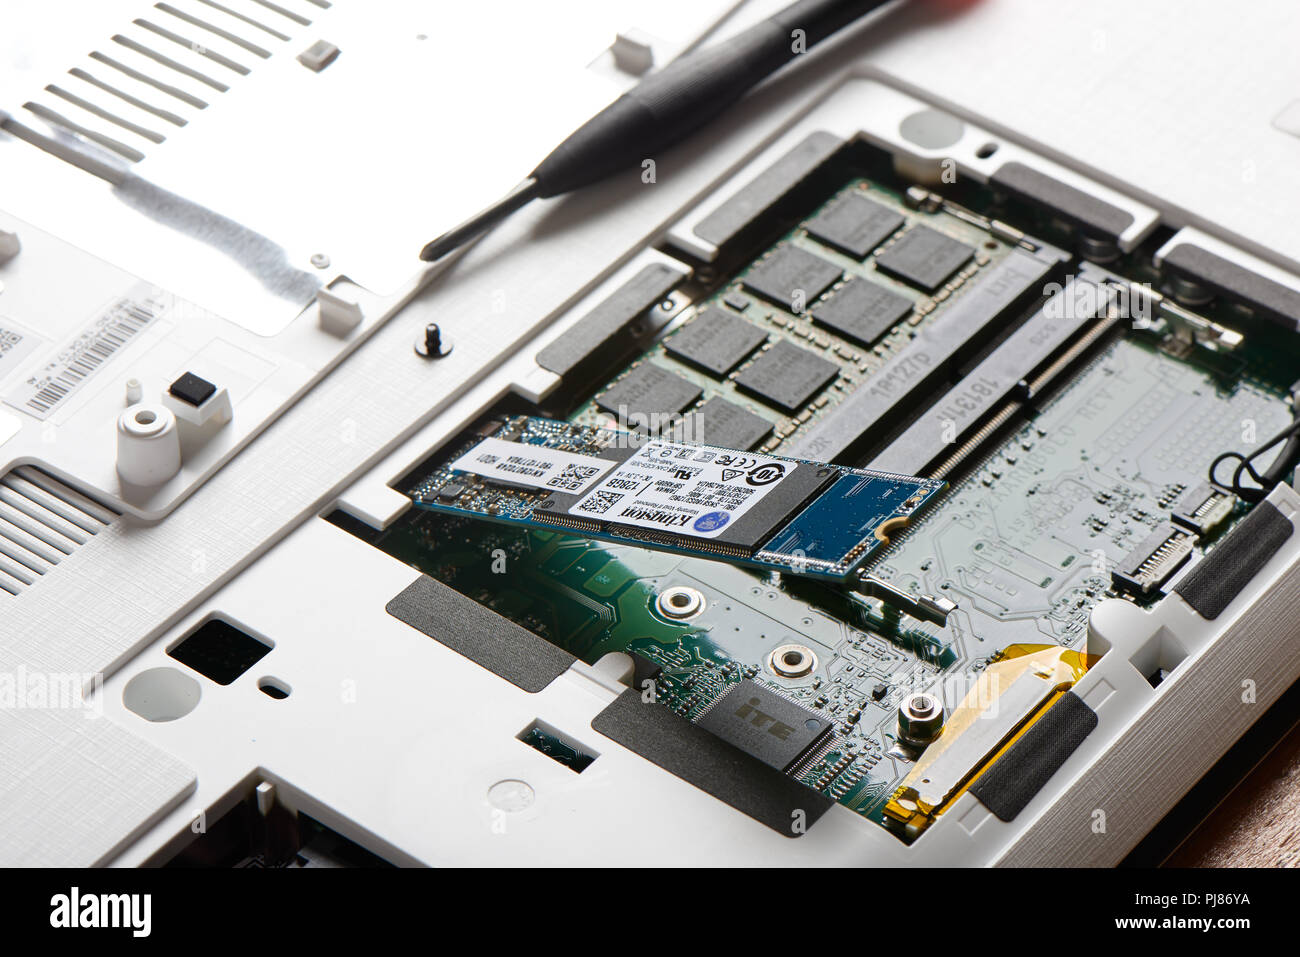 Gimpo-si, Korea - July 10, 2018: Closeup of SATA type SSD(Solid-State Drive)  connected to M.2 slot on a board of laptop computer Stock Photo - Alamy